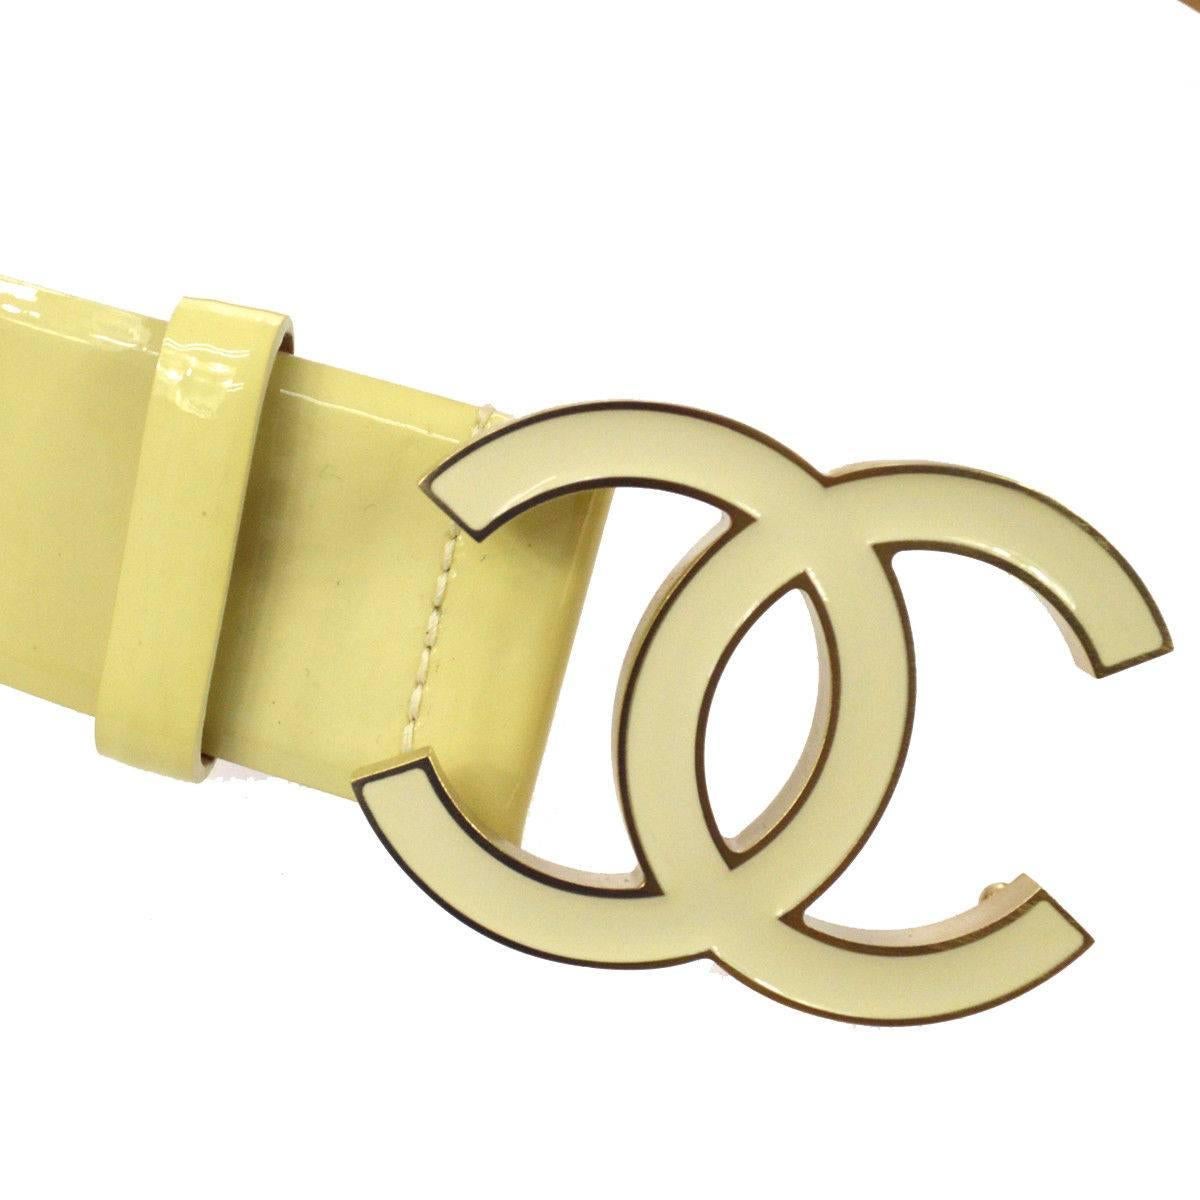 Chanel Cream Nude Gold CC Patent Leather Evening Waist Belt 

Size listed 90/36
Patent leather
Gold tone hardware
Peg closure
Made in Italy
Width 1.5